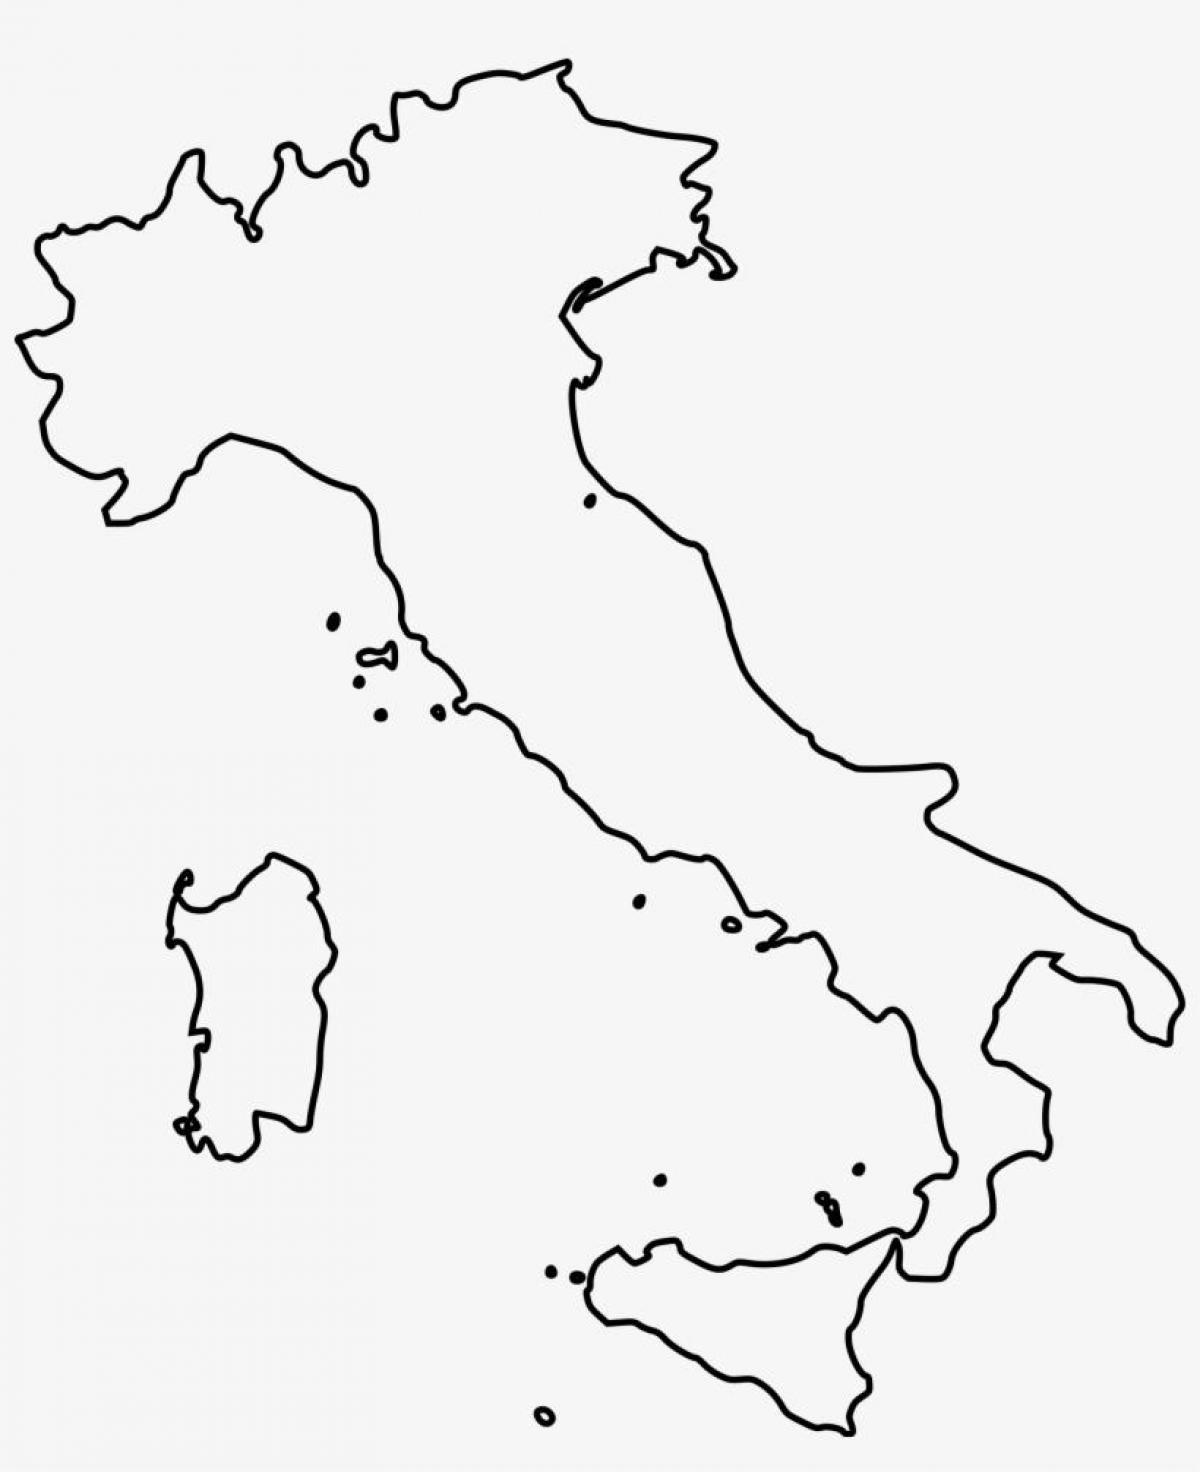 Italy contours map